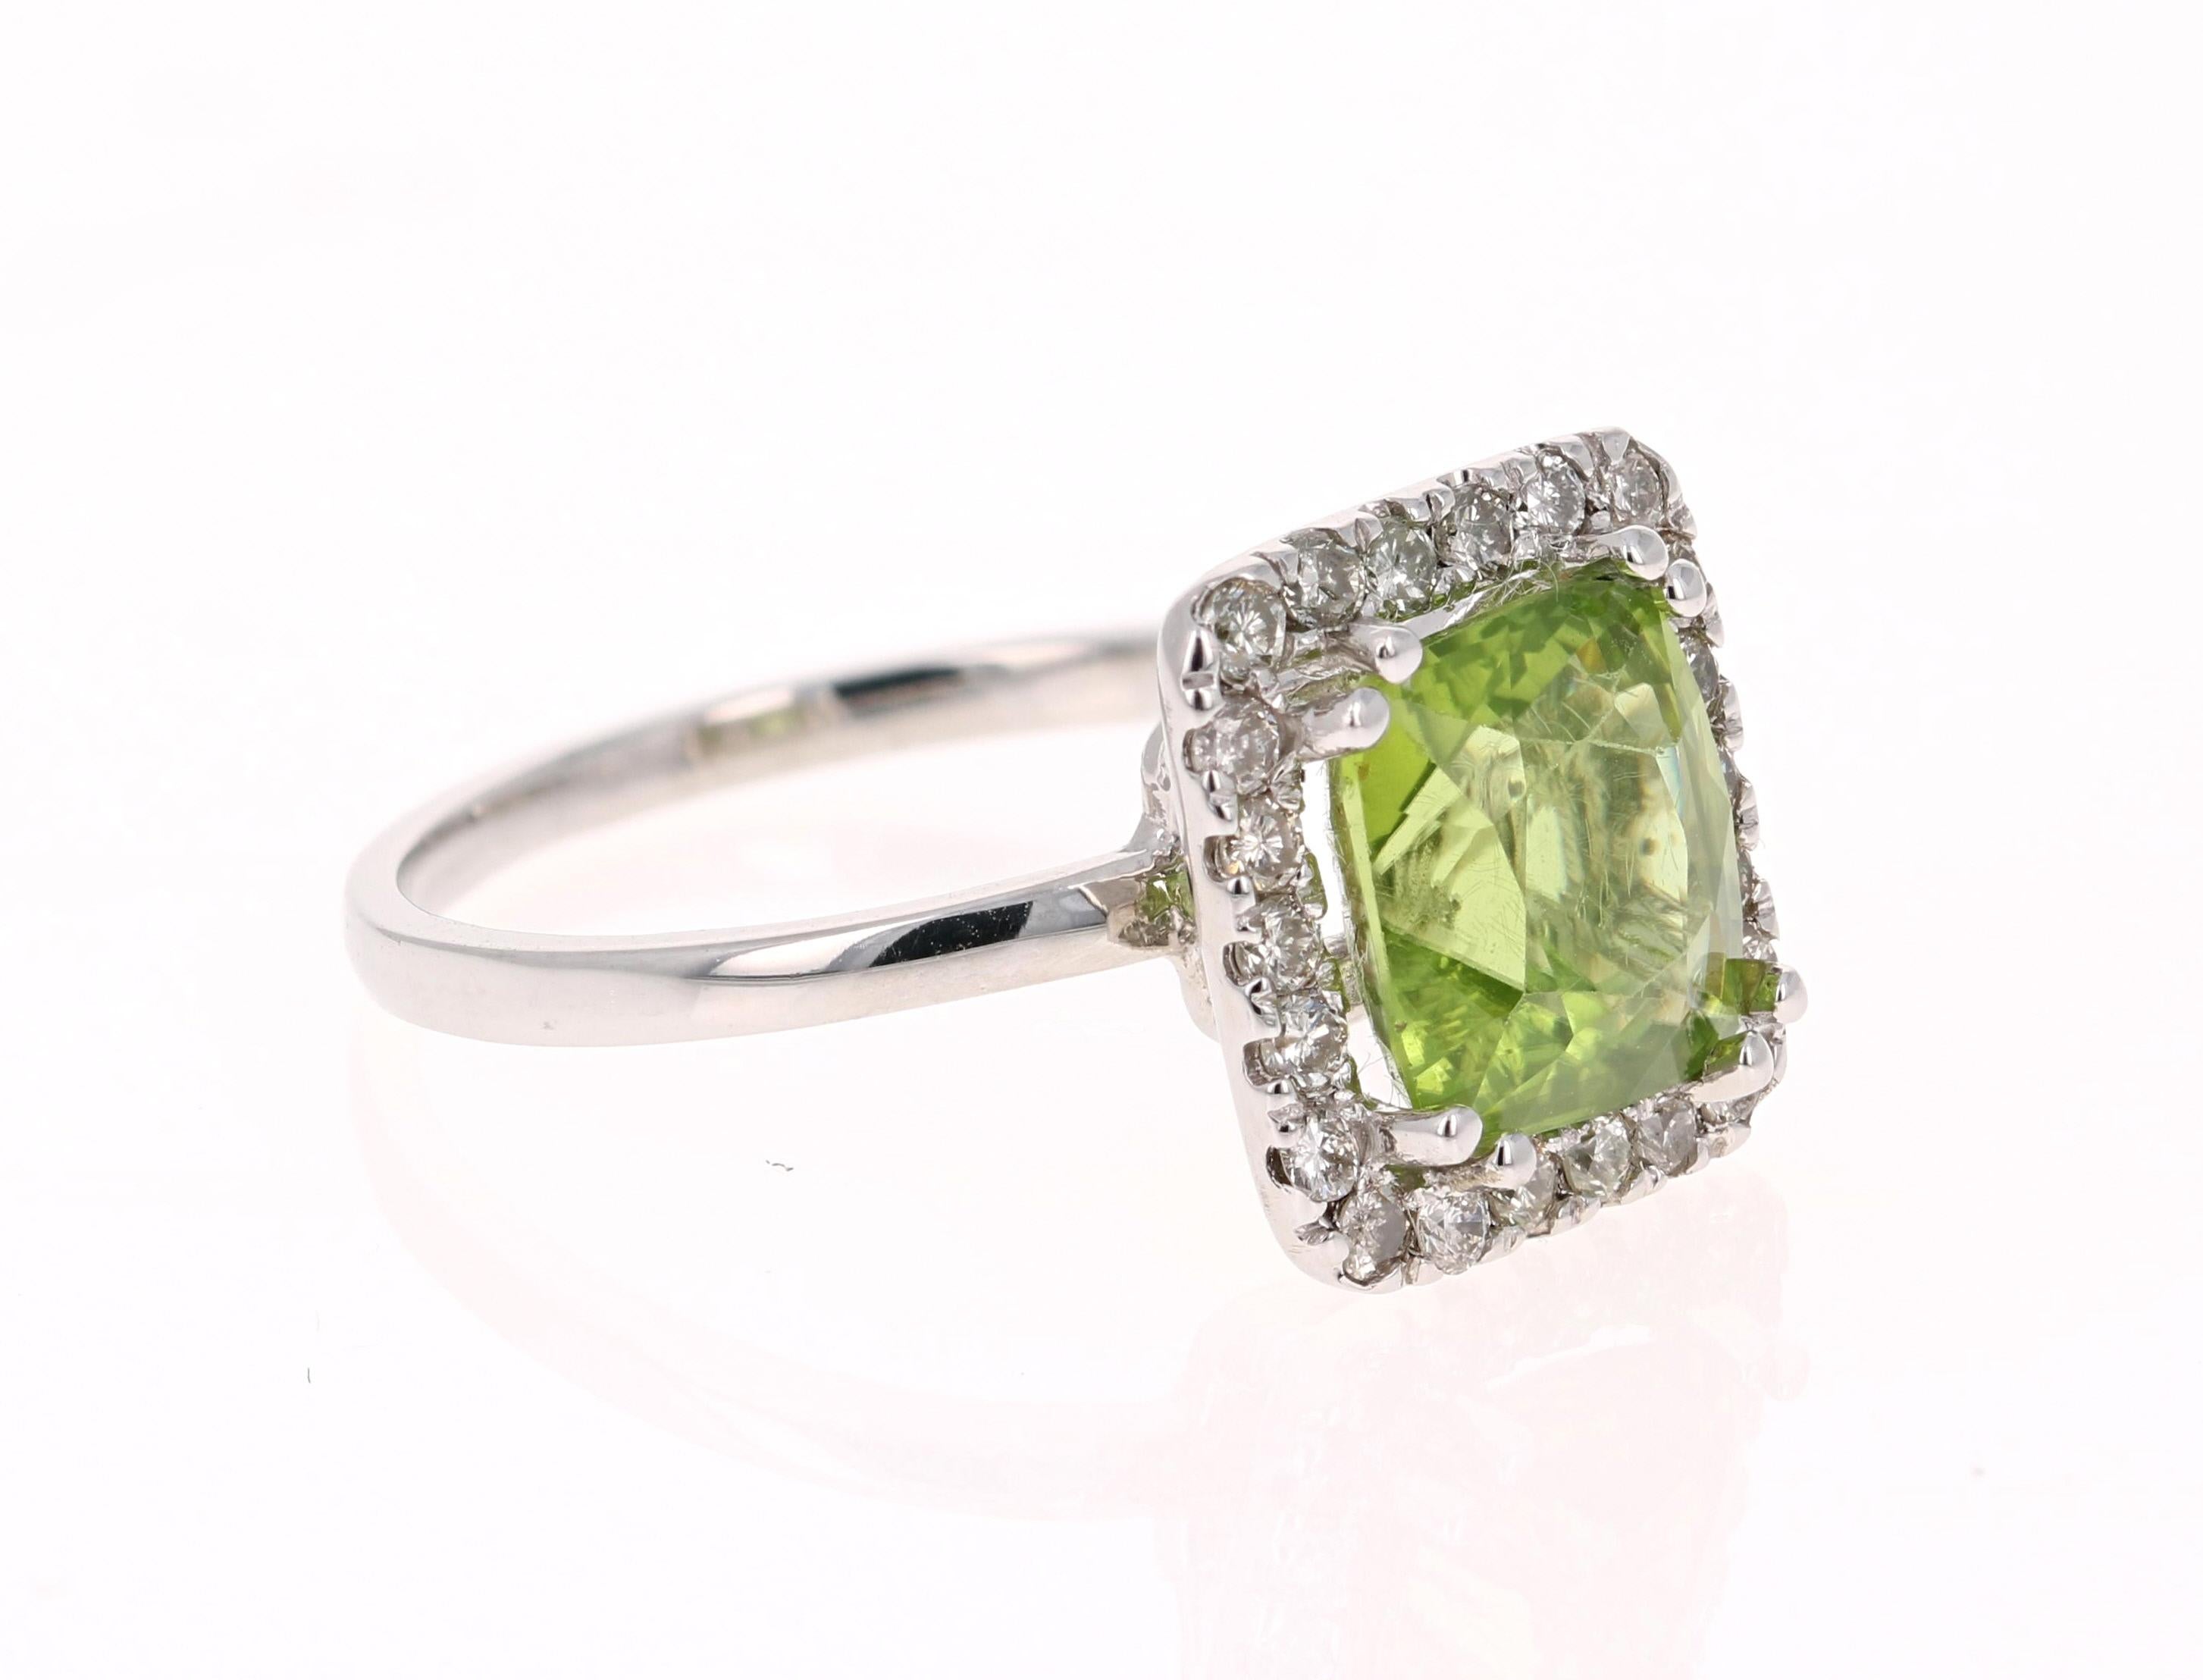 Bright & Beautiful!

This Peridot and Diamond Ring has a 3.11 Carat Square Cushion Cut Peridot and has 22 Round Cut Diamonds that weigh 0.41 Carats. The total carat weight of the ring is 3.52 Carats. 

It is set in 14 Karat White Gold and weighs